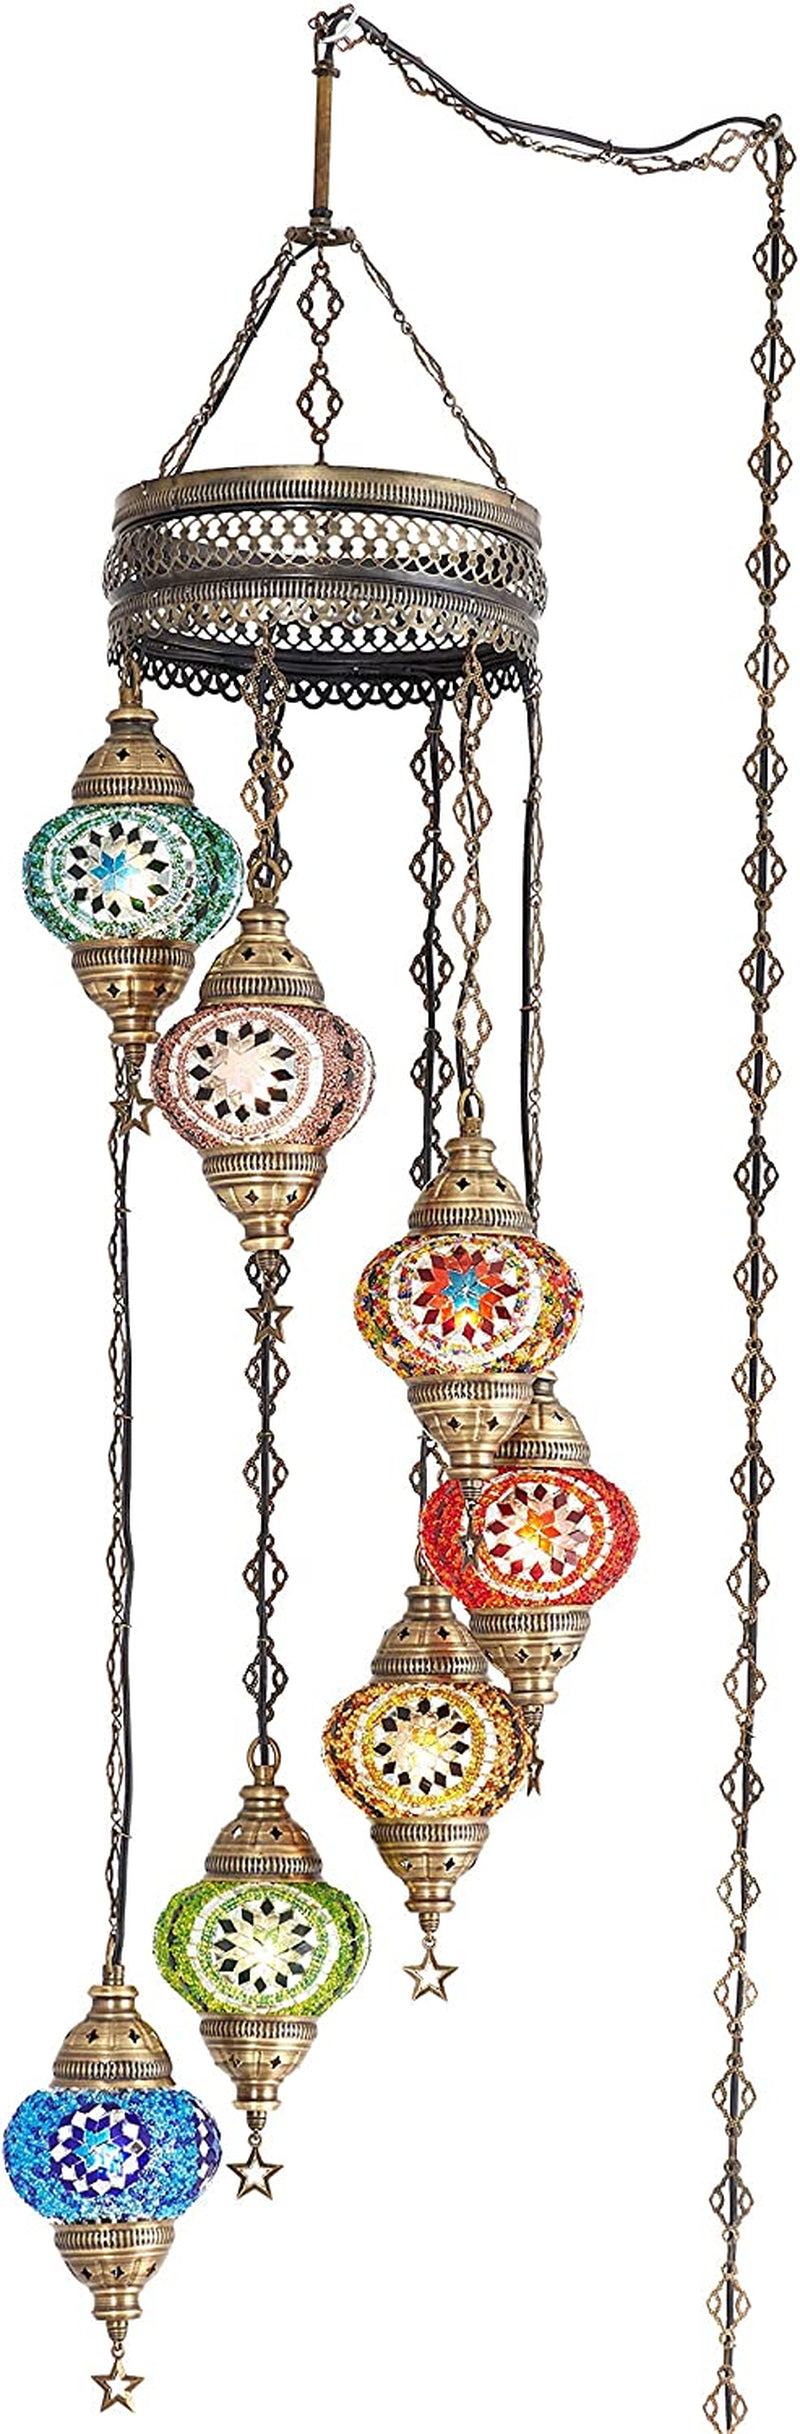 7 Globes Swag Plug in Turkish Moroccan Mosaic Bohemian Tiffany Ceiling Hanging Pendant Light Lamp Chandelier Lighting with 15Feet Cord Chain and Plug, 50" Height (Multicolor)